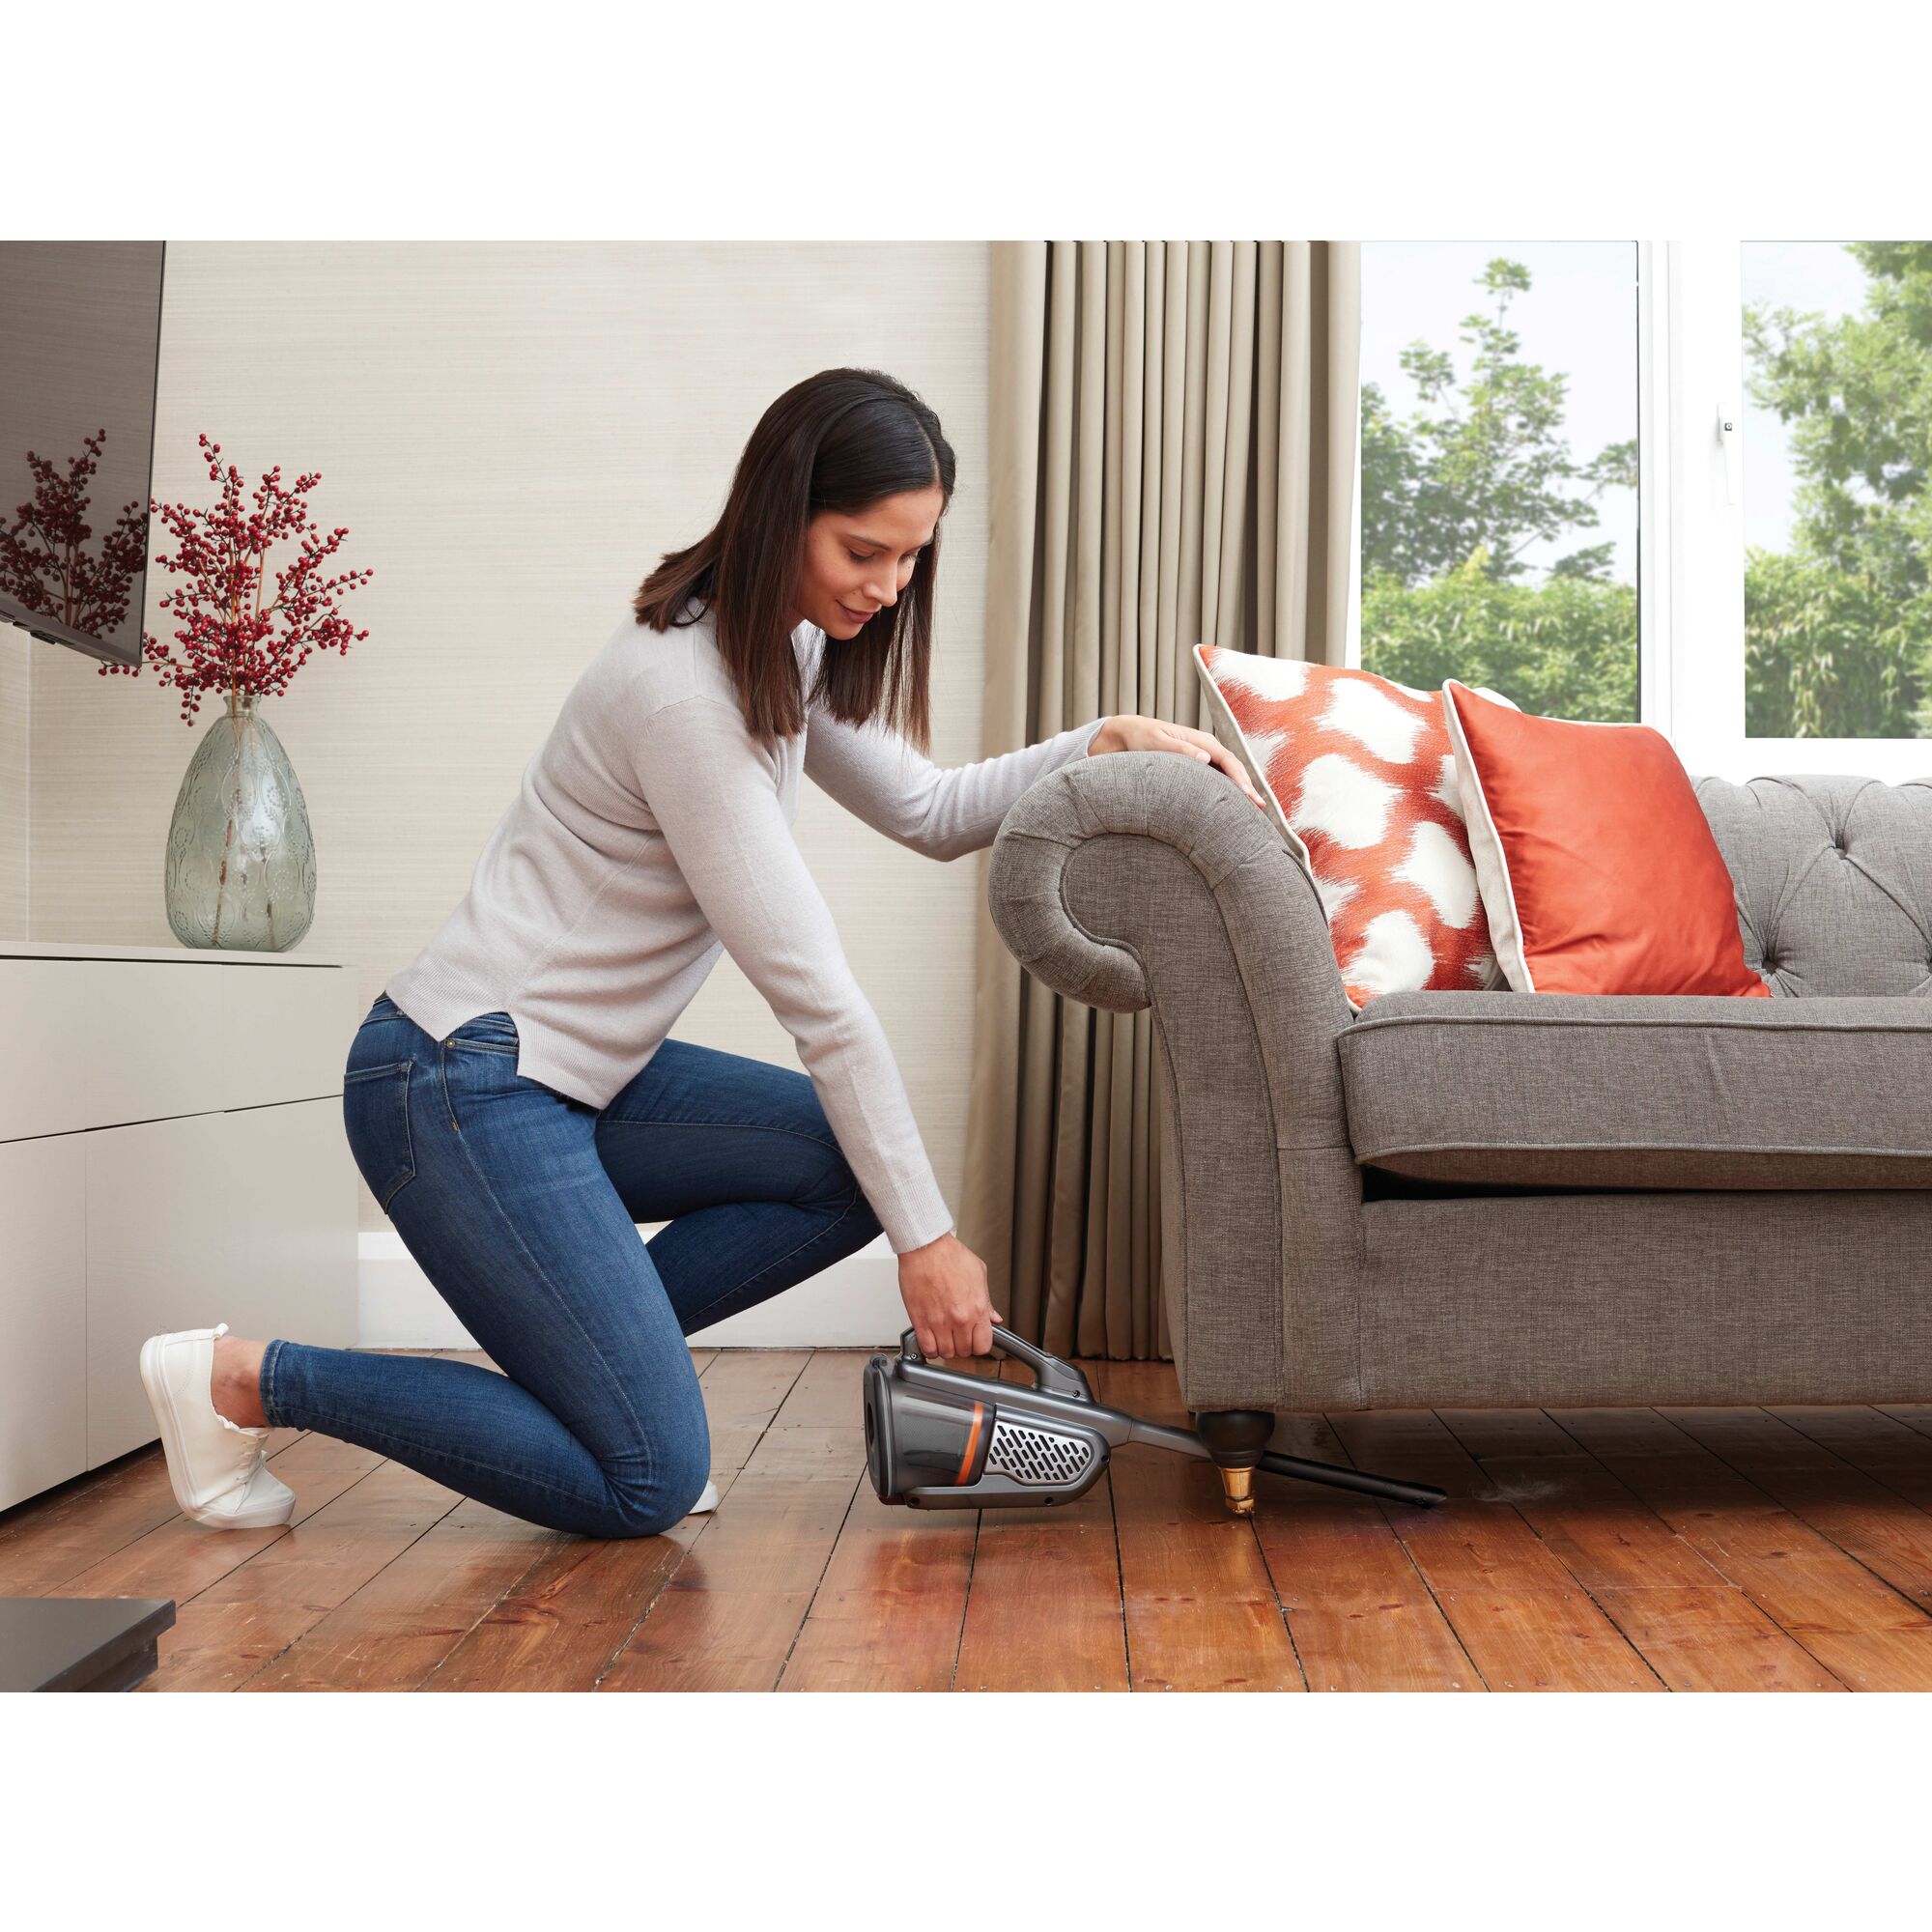 Dustbuster AdvancedClean plus Hand Vacuum being used by person to clean floor under couch.